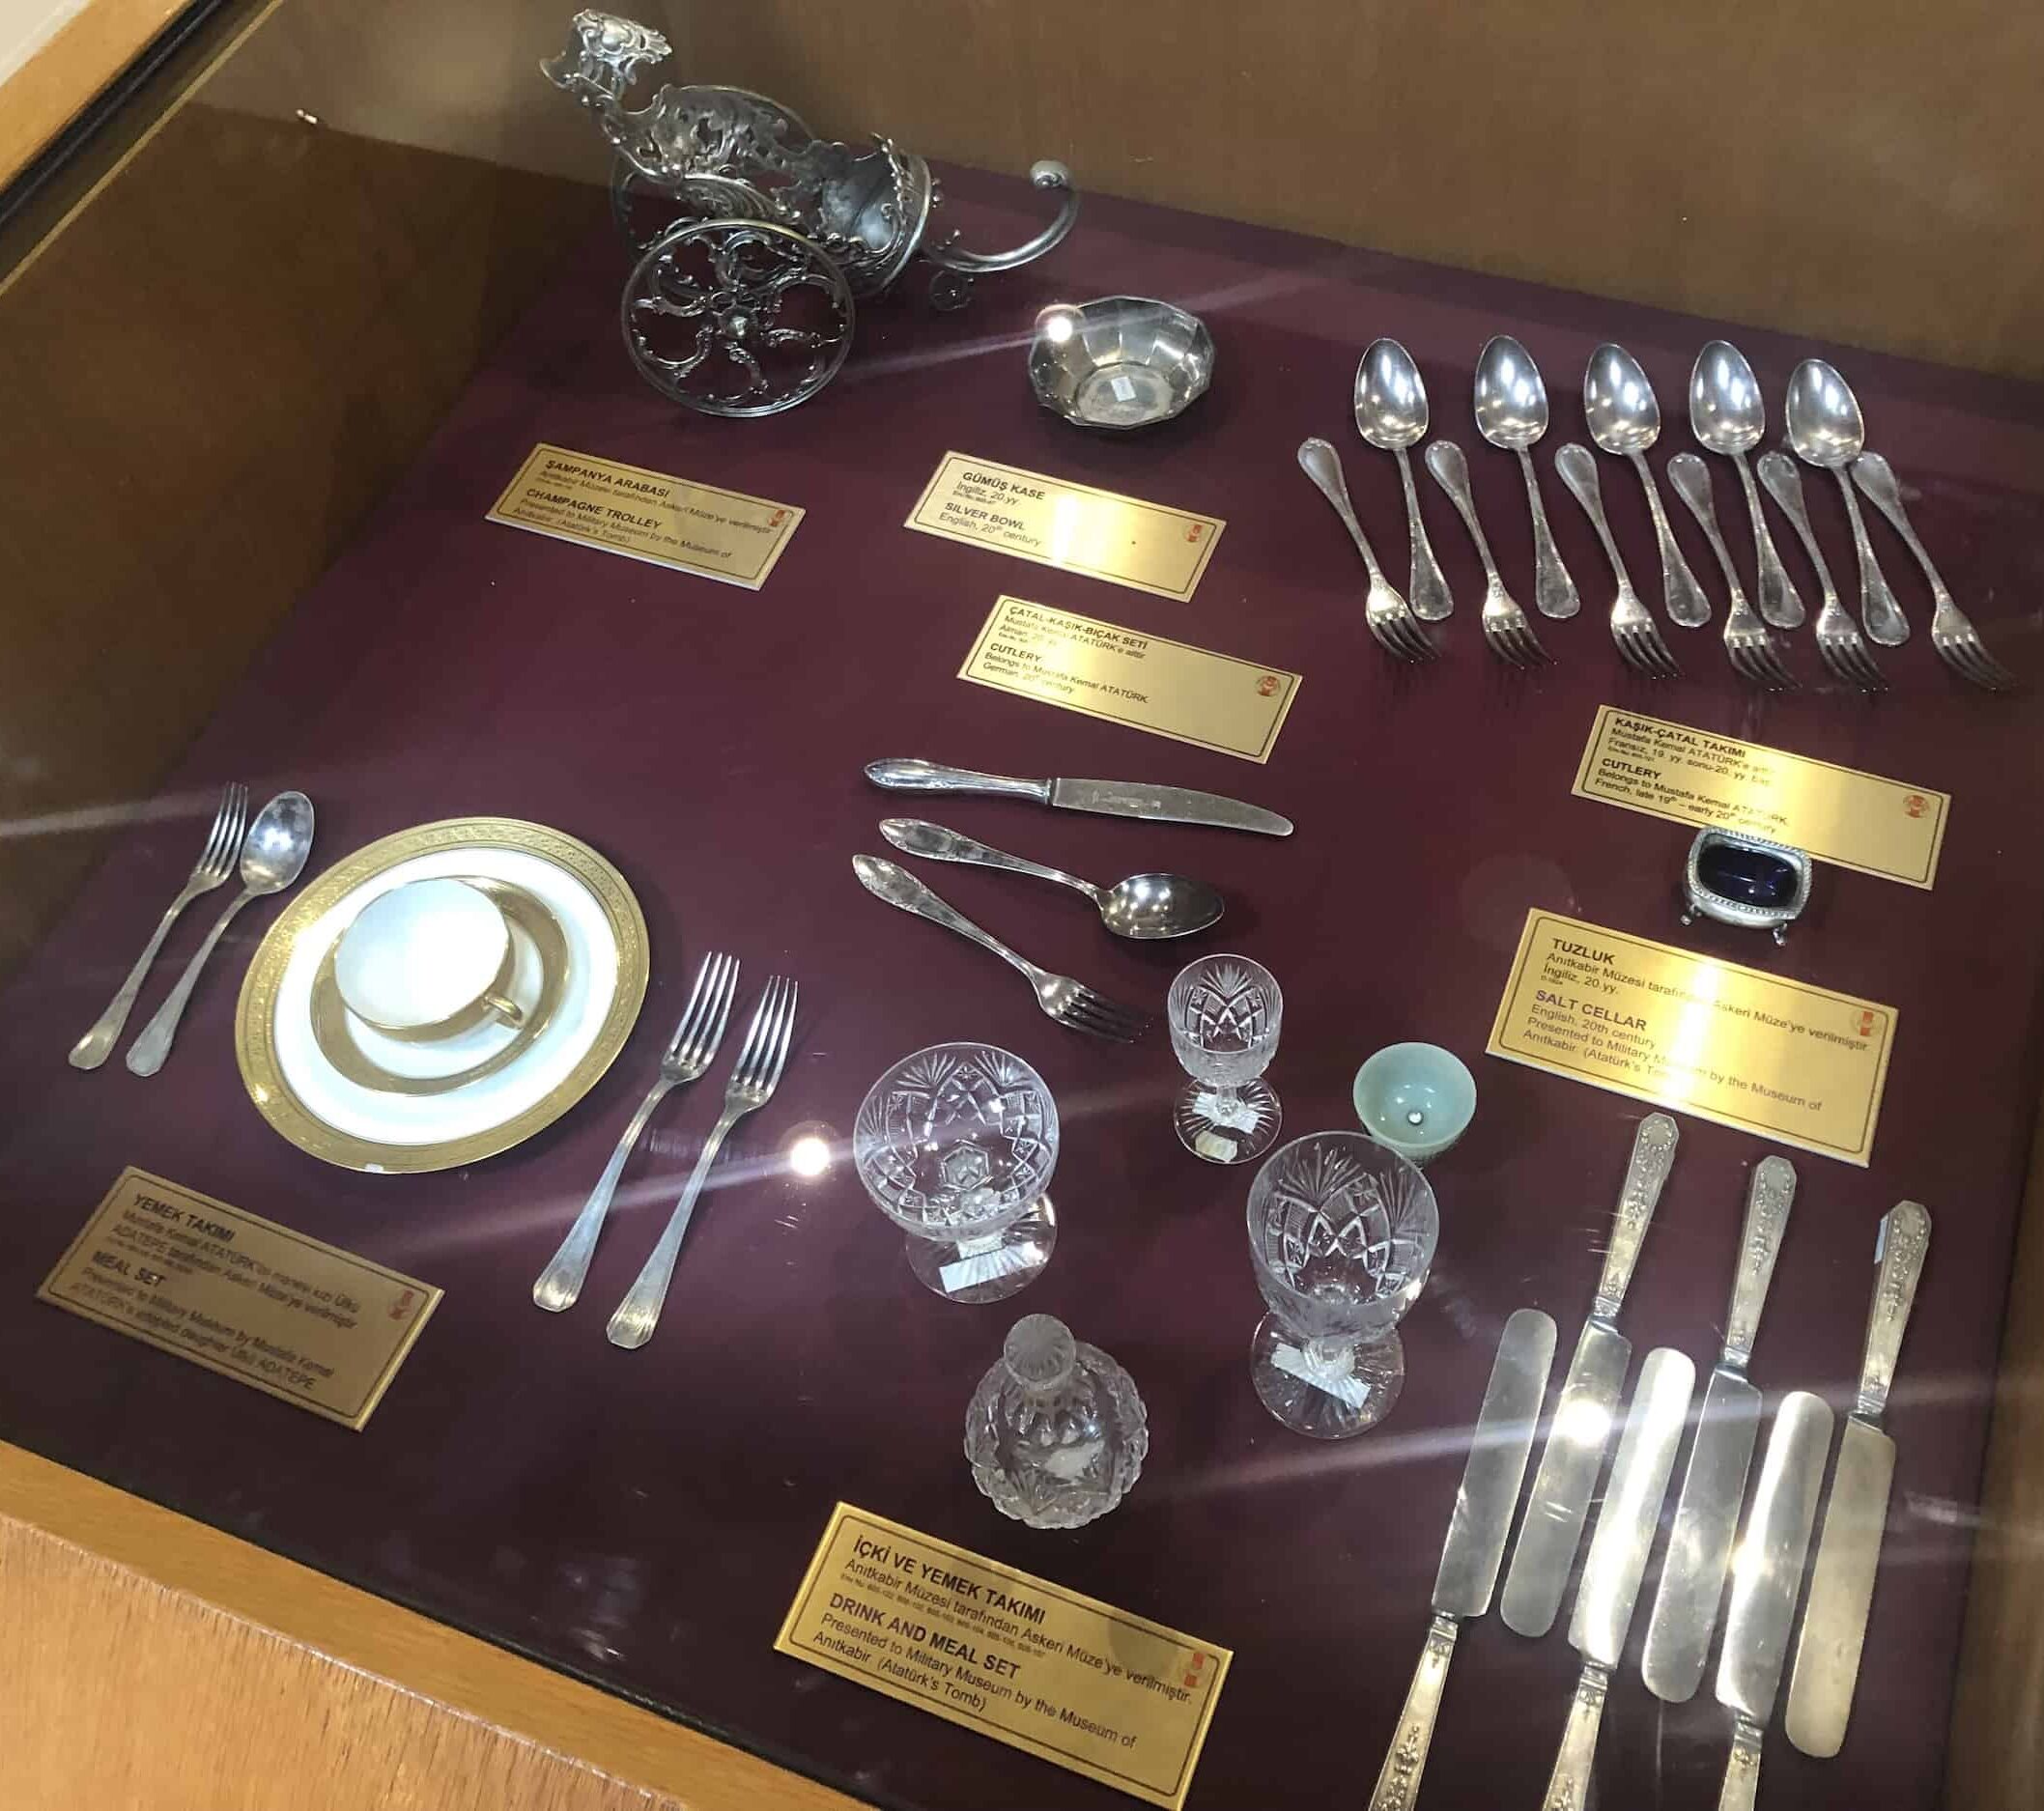 Cutlery and meal sets in the Atatürk Hall at the Harbiye Military Museum in Istanbul, Turkey